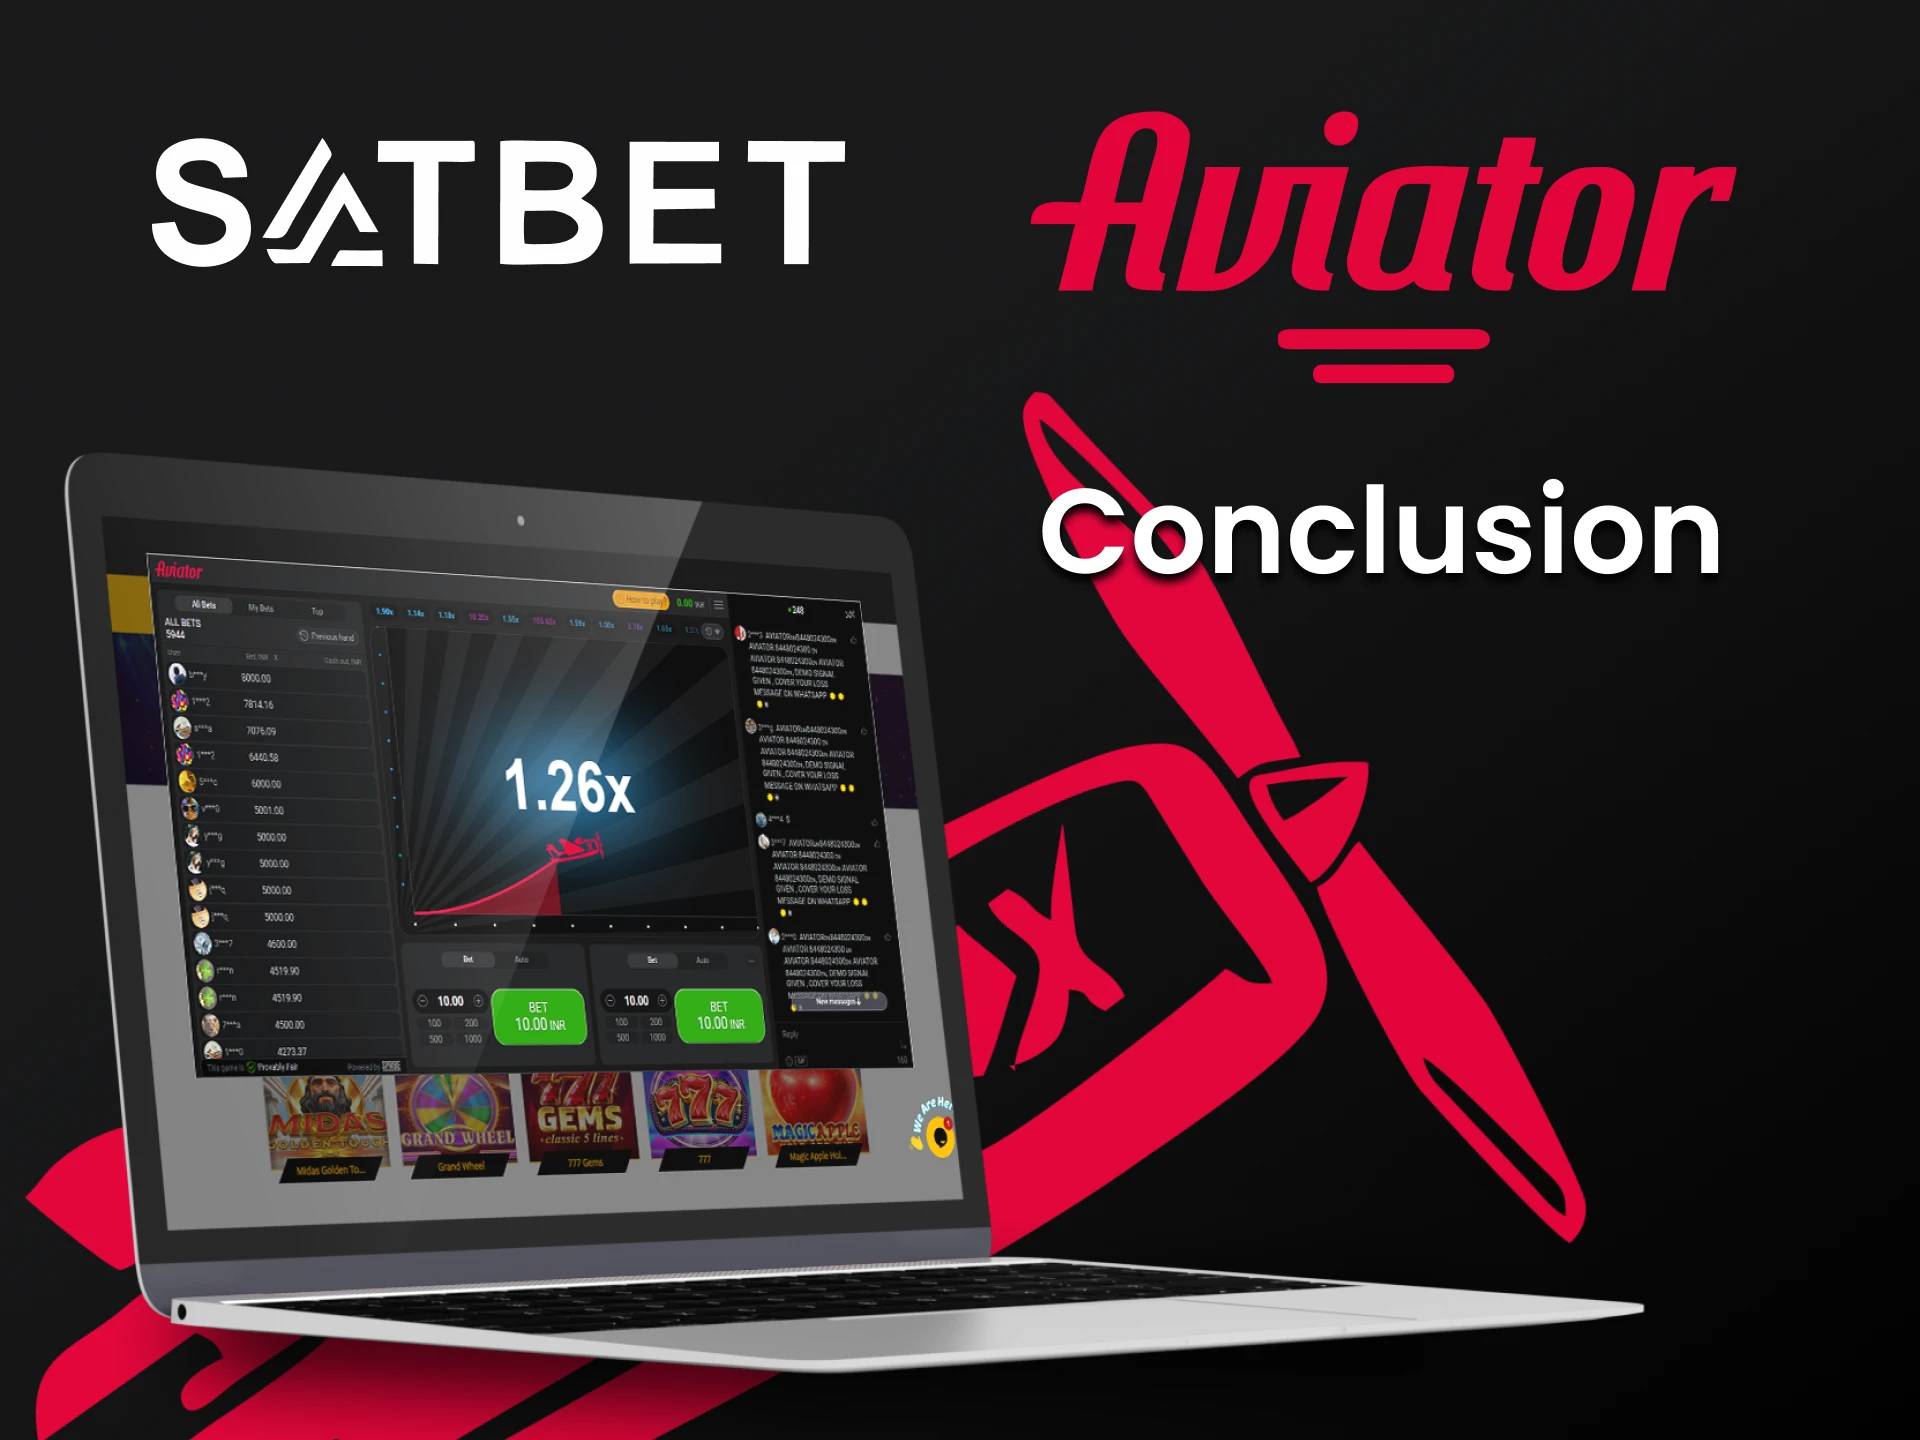 Satbet is perfect for playing Aviator.